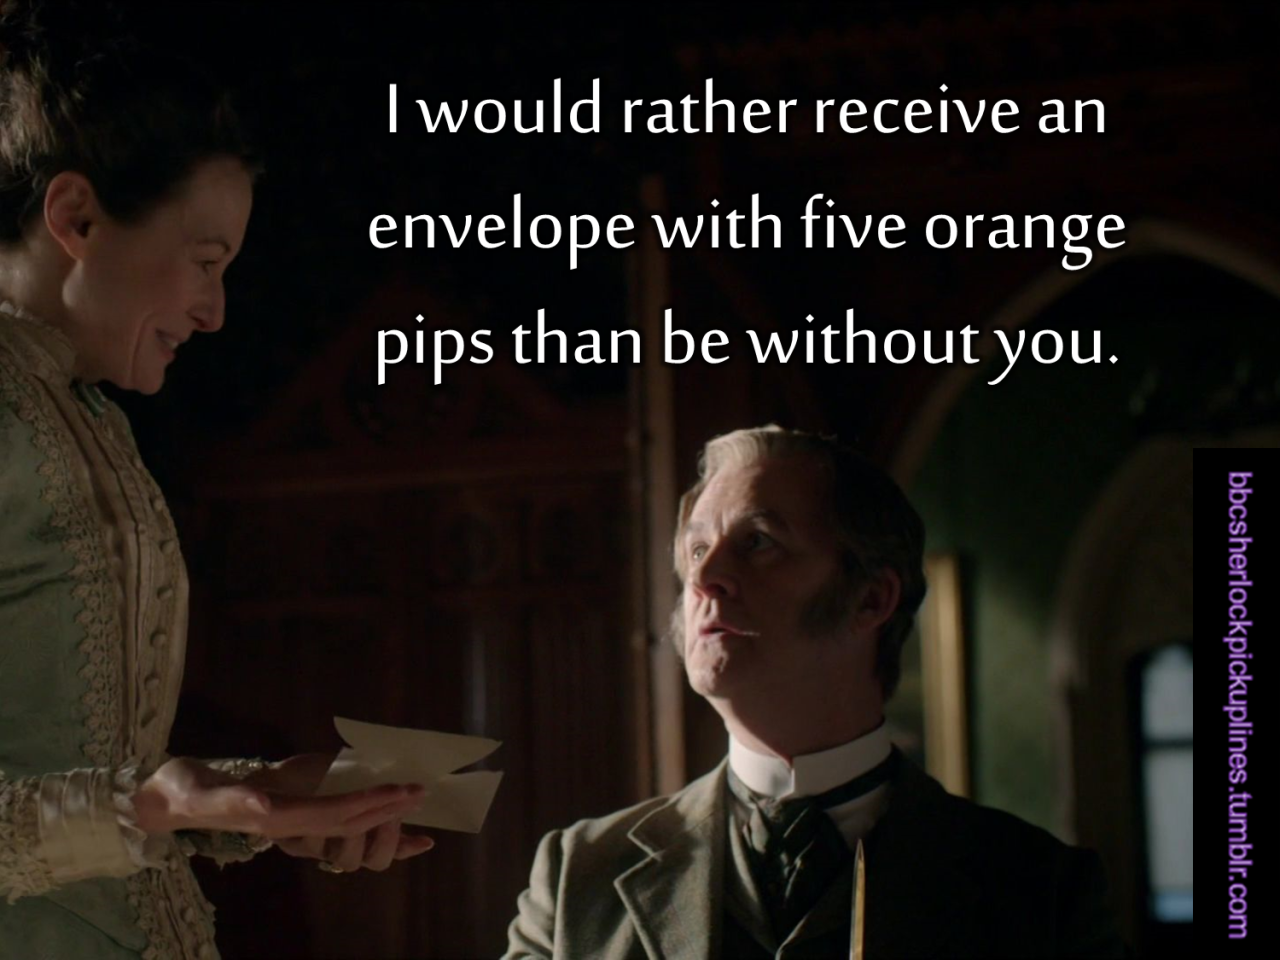 â€œI would rather receive an envelope with five orange pips than be without you.â€